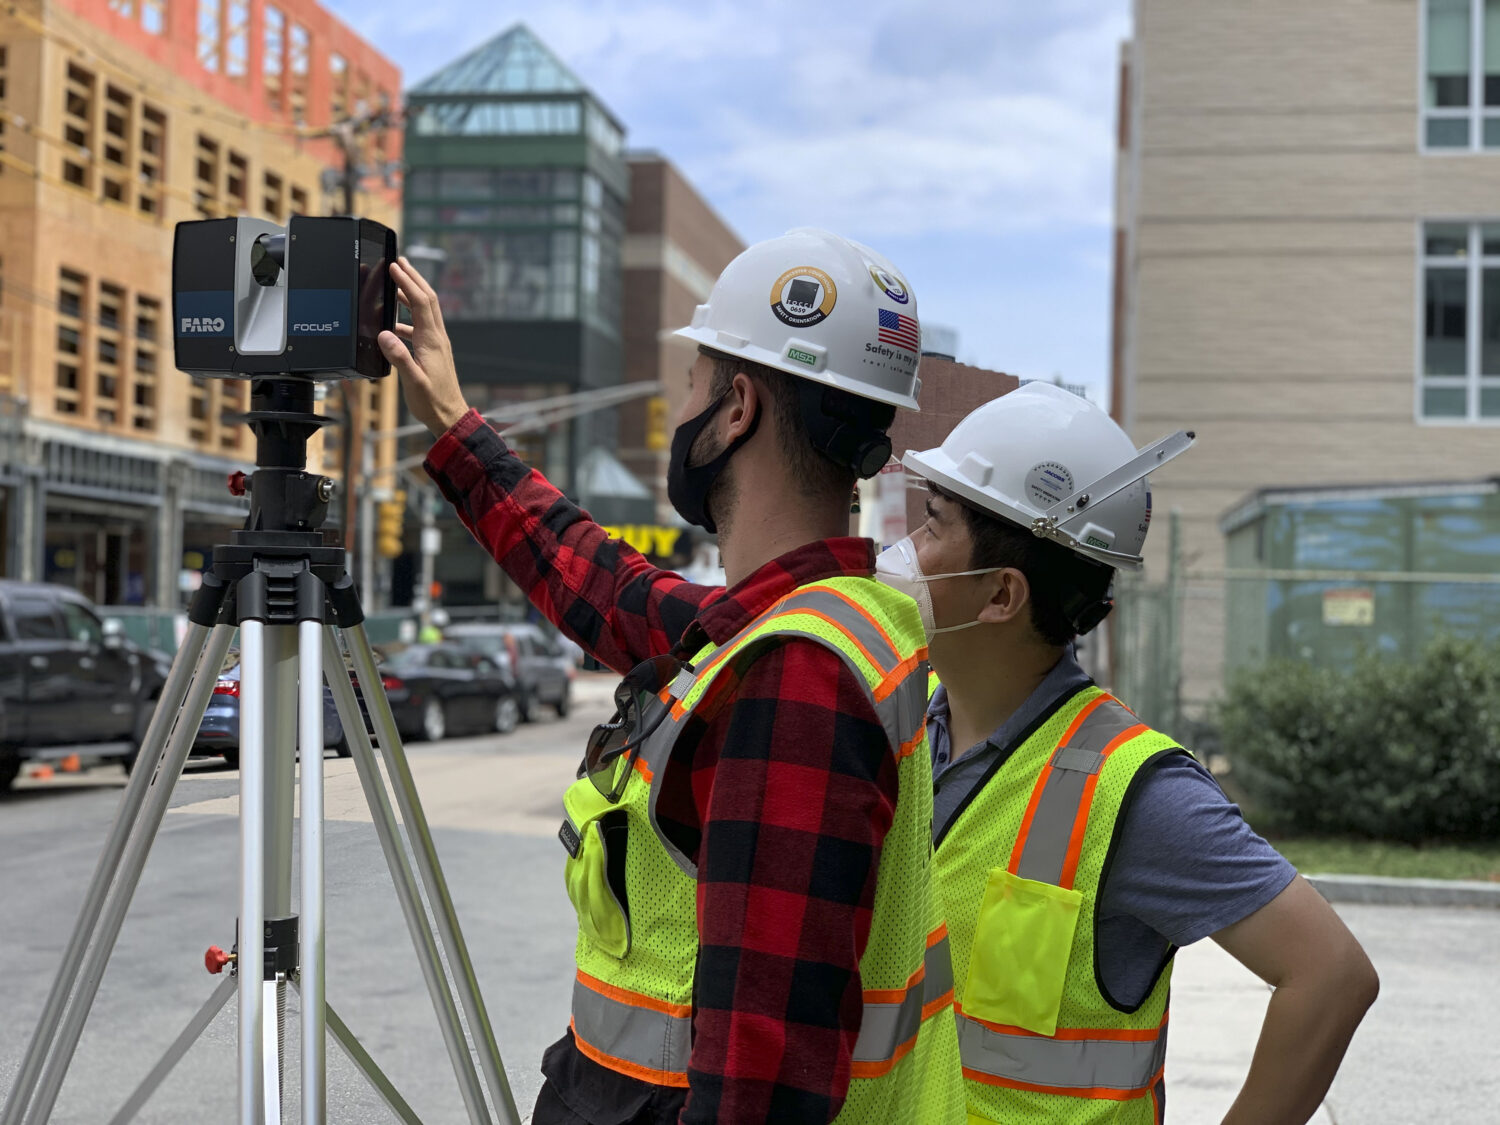 Field Engineer and VDC Specialist using laser scanning equipment to map a building in Cambiridge